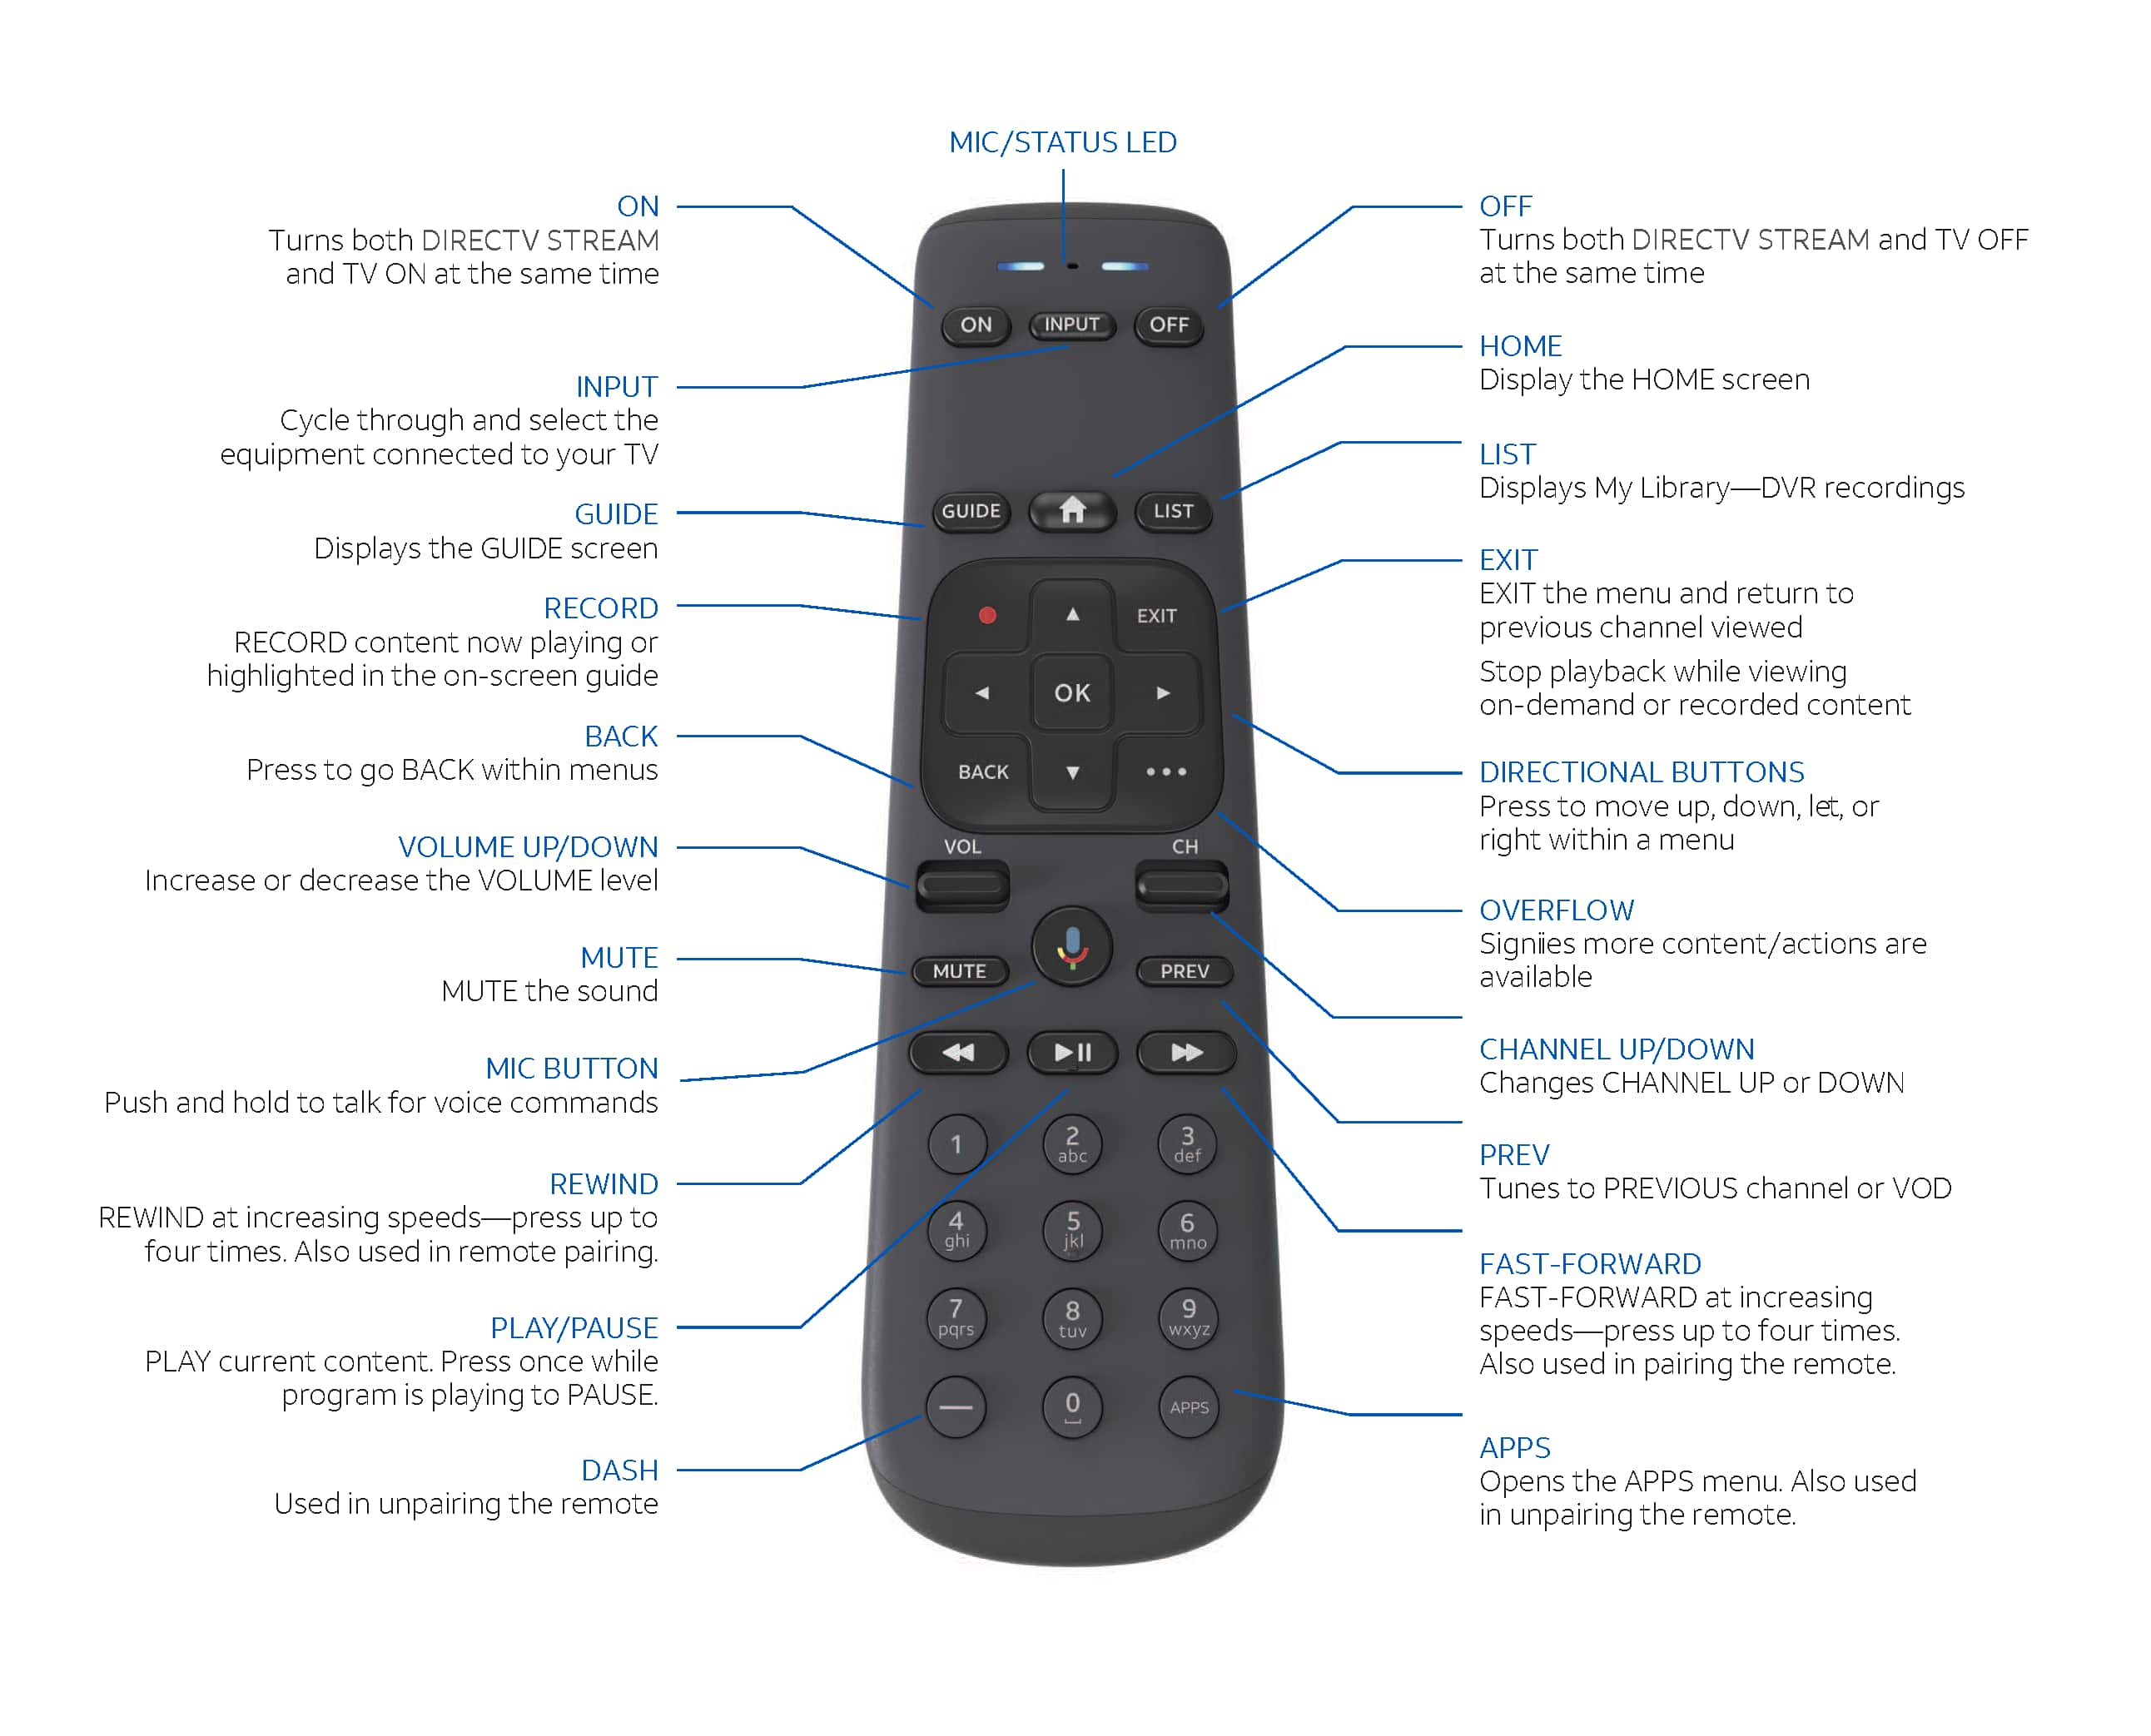 how to use firestick with directv